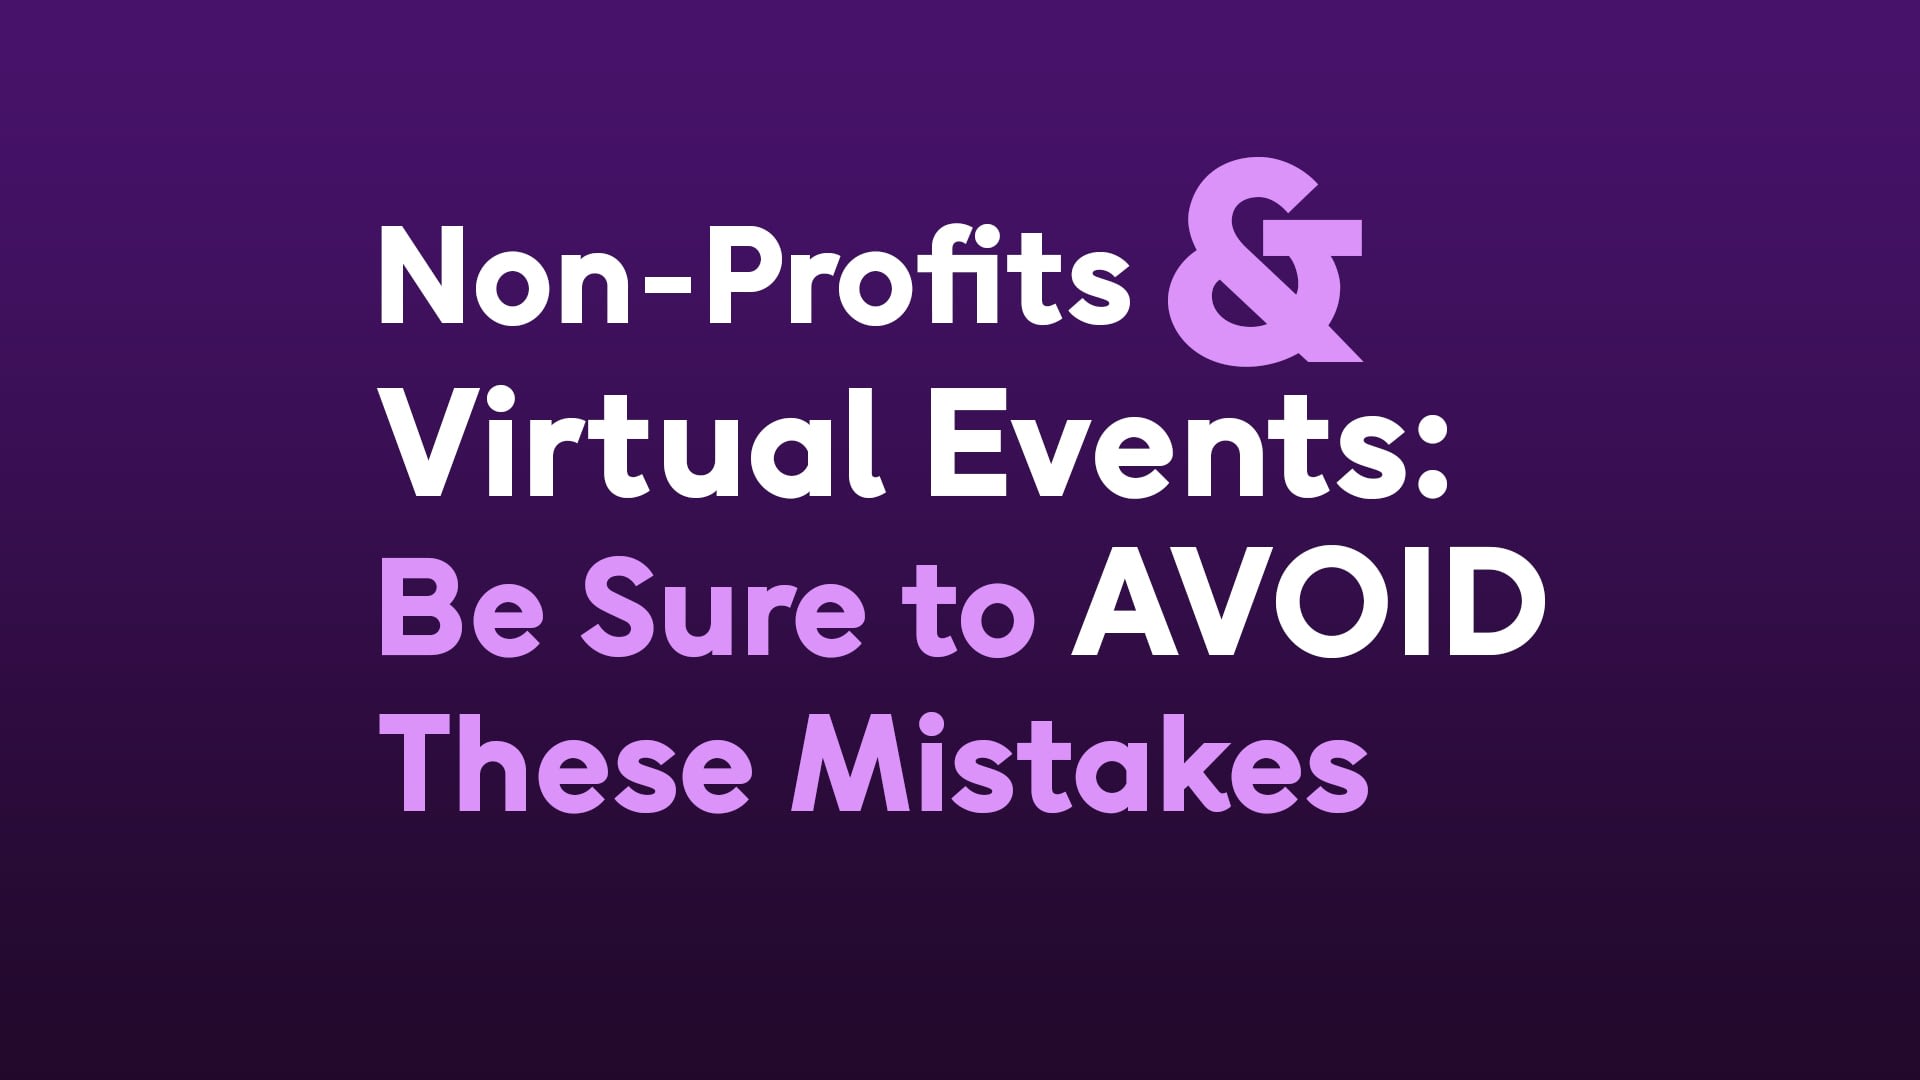 Non-Profits And Virtual Events: Be Sure To Avoid These Mistakes